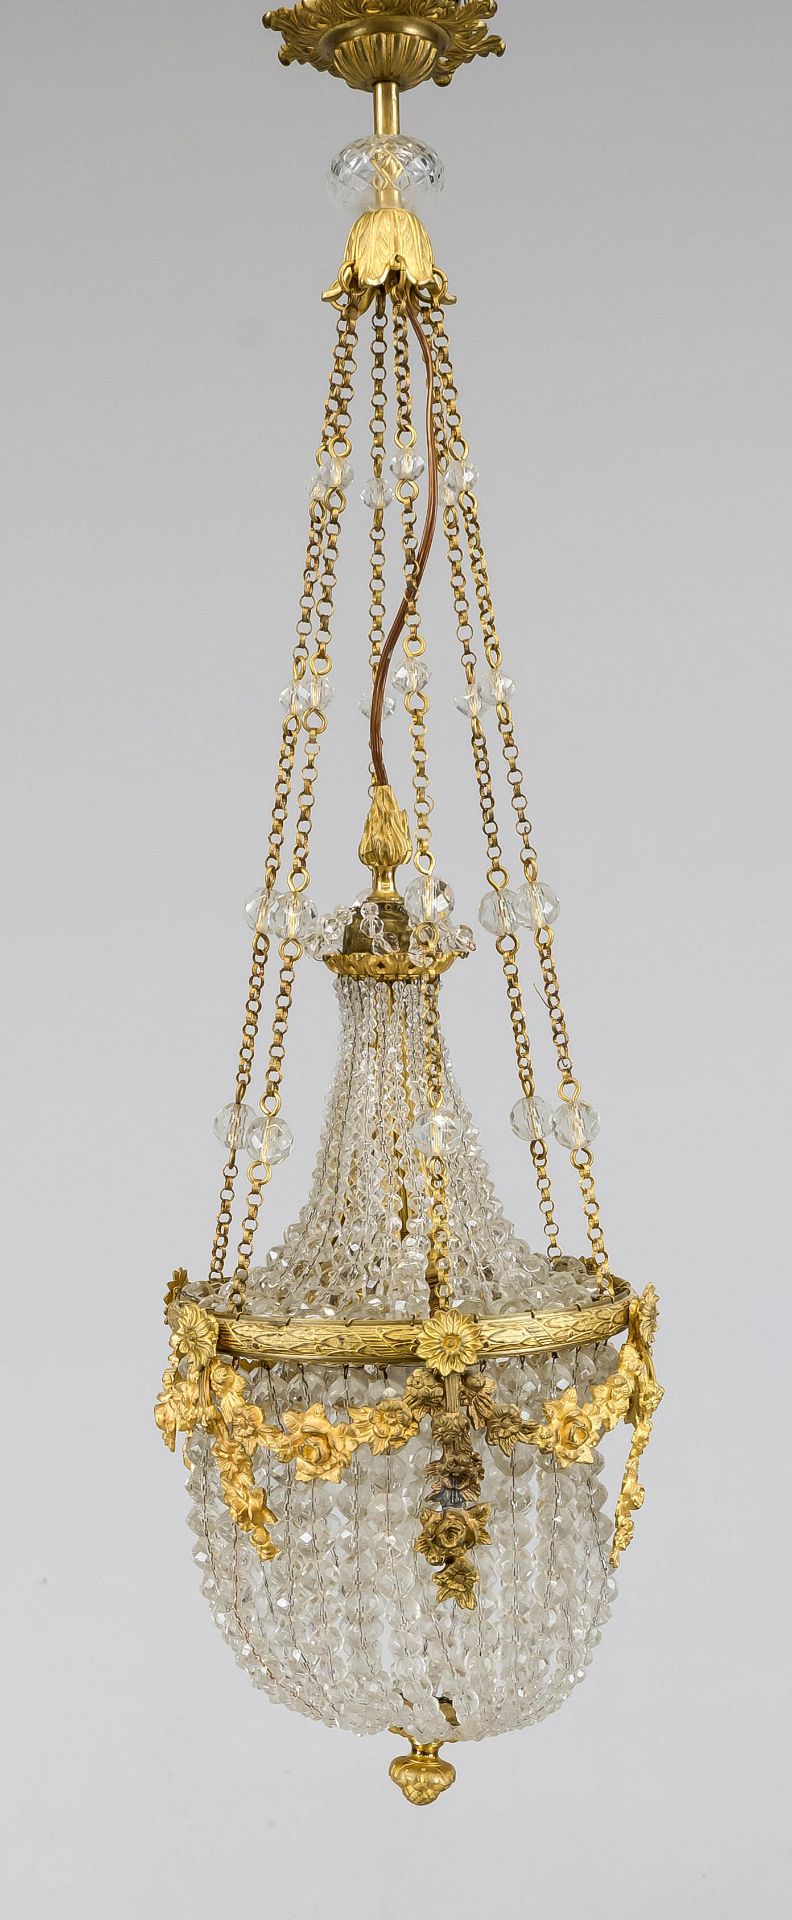 Ceiling lamp, late 19th century Ornamented and gilded wreath with garland on 6 decorative chains